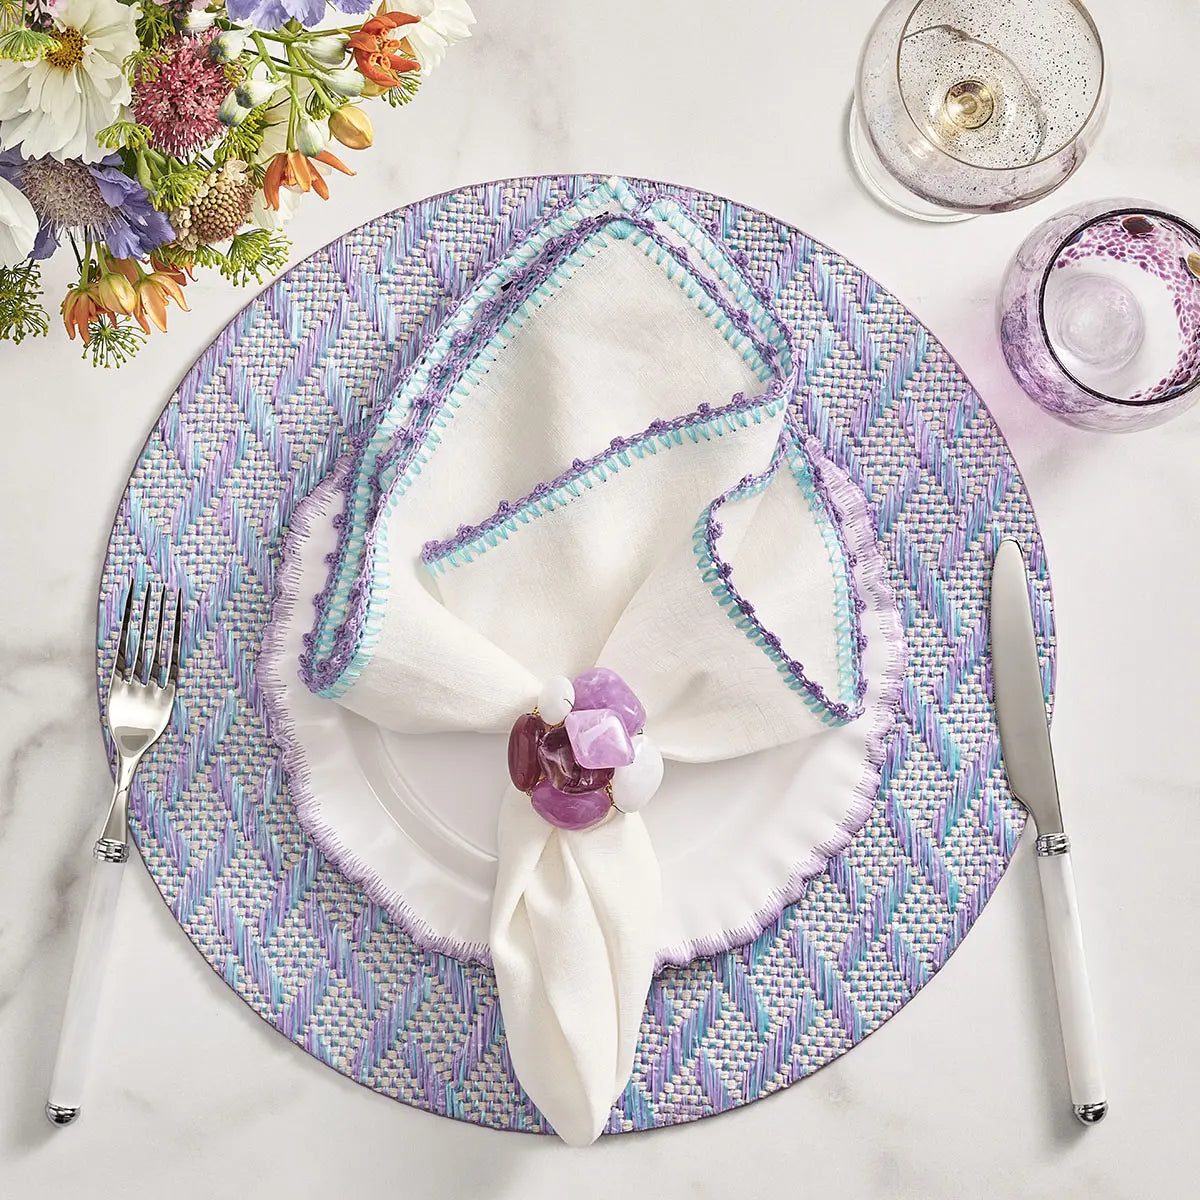 Kim Seybert Knotted Edge Napkin in White Lilac and Blue set on a table